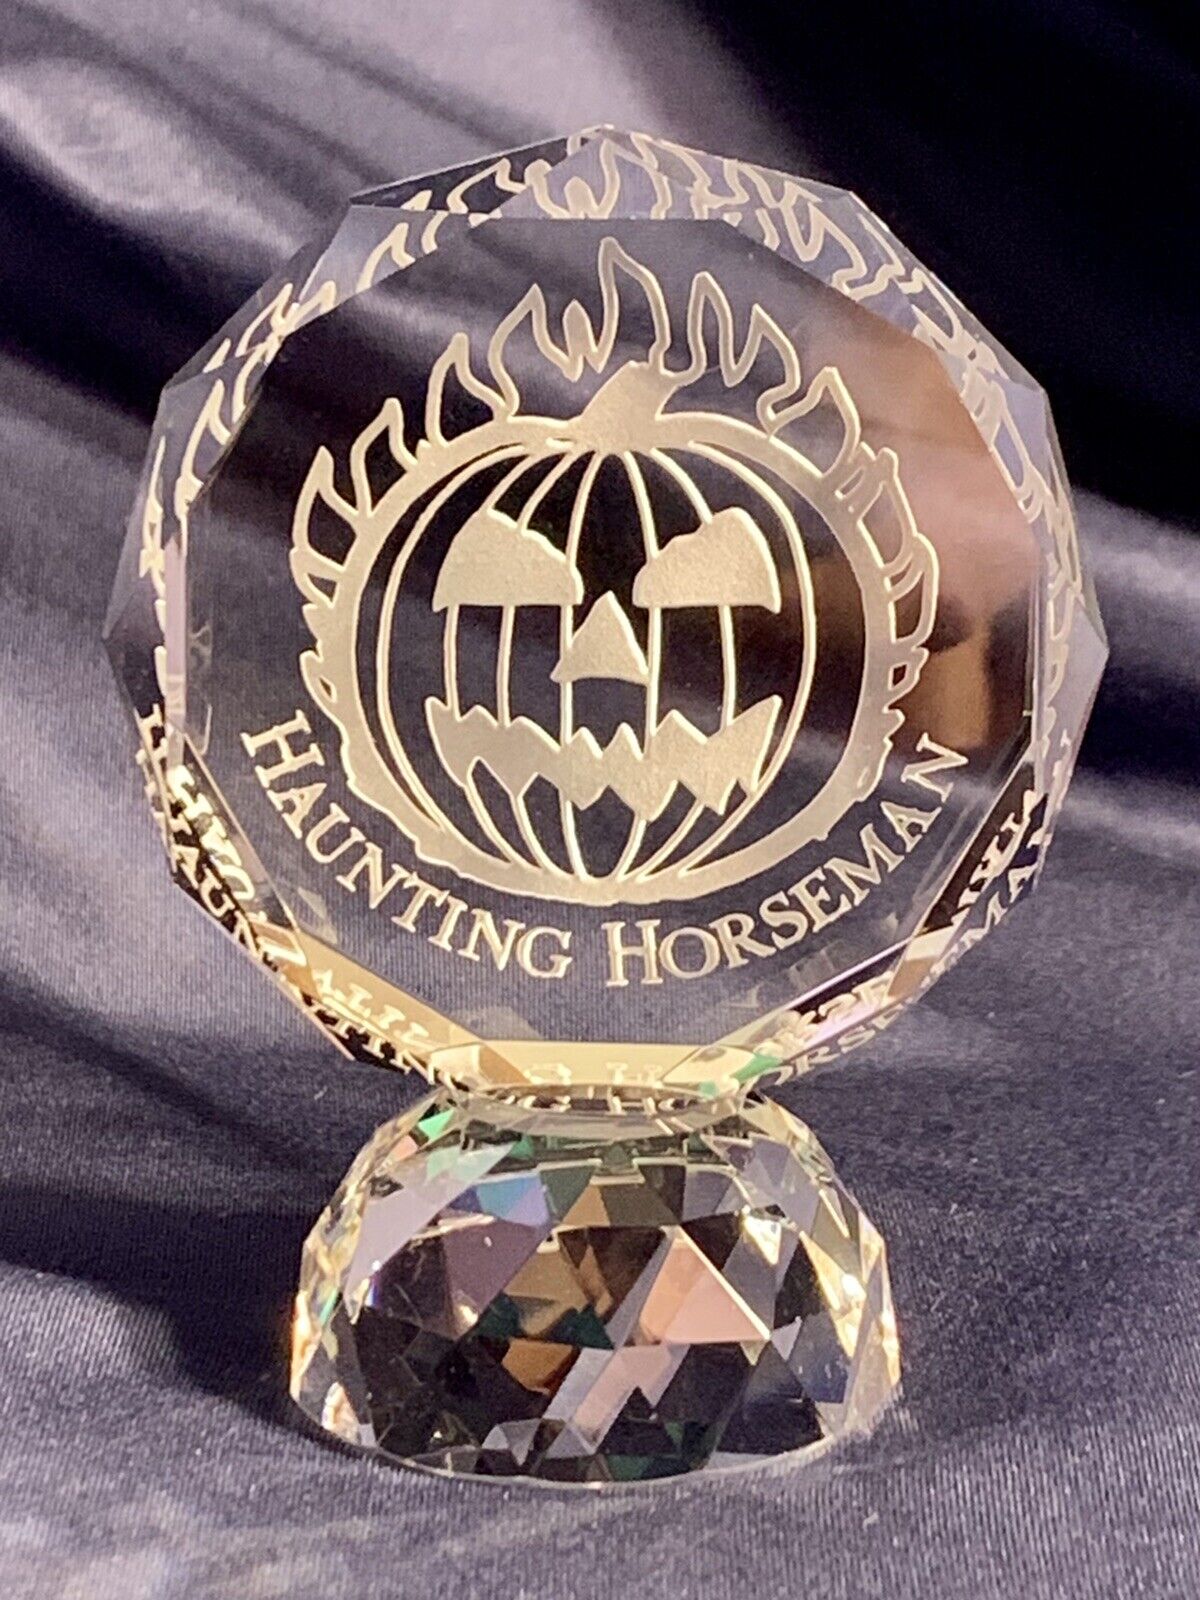 Haunting Horseman Crystal by Martine Milan for WDCC Headless Horseman NEW